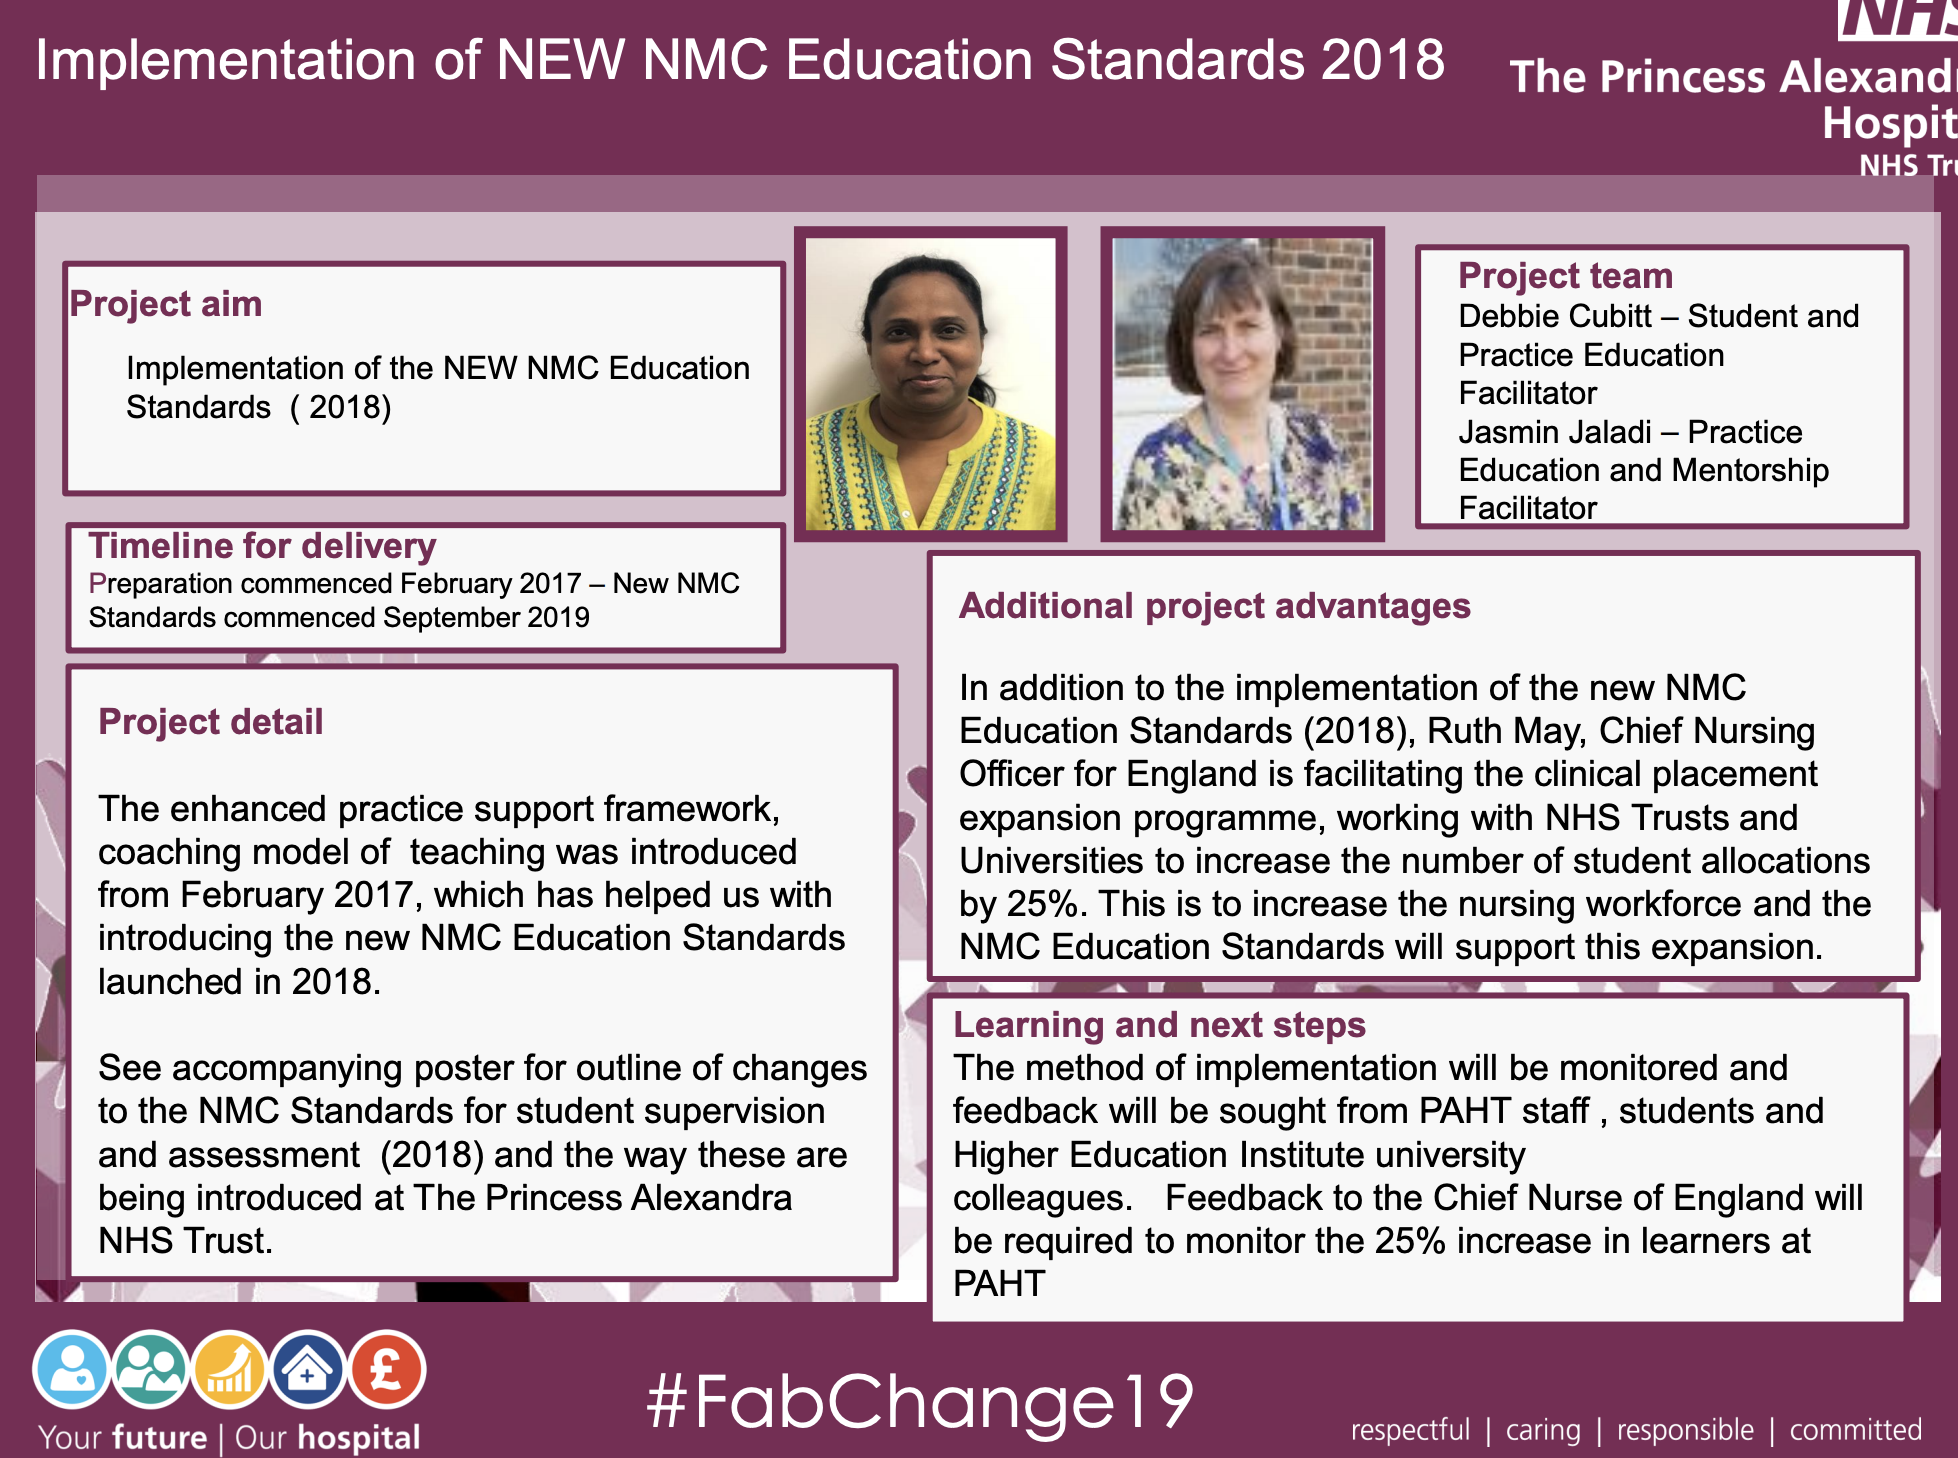 PAHT - Implementation of NEW NMC Education Standards 2018 - @QualityFirstPAH featured image